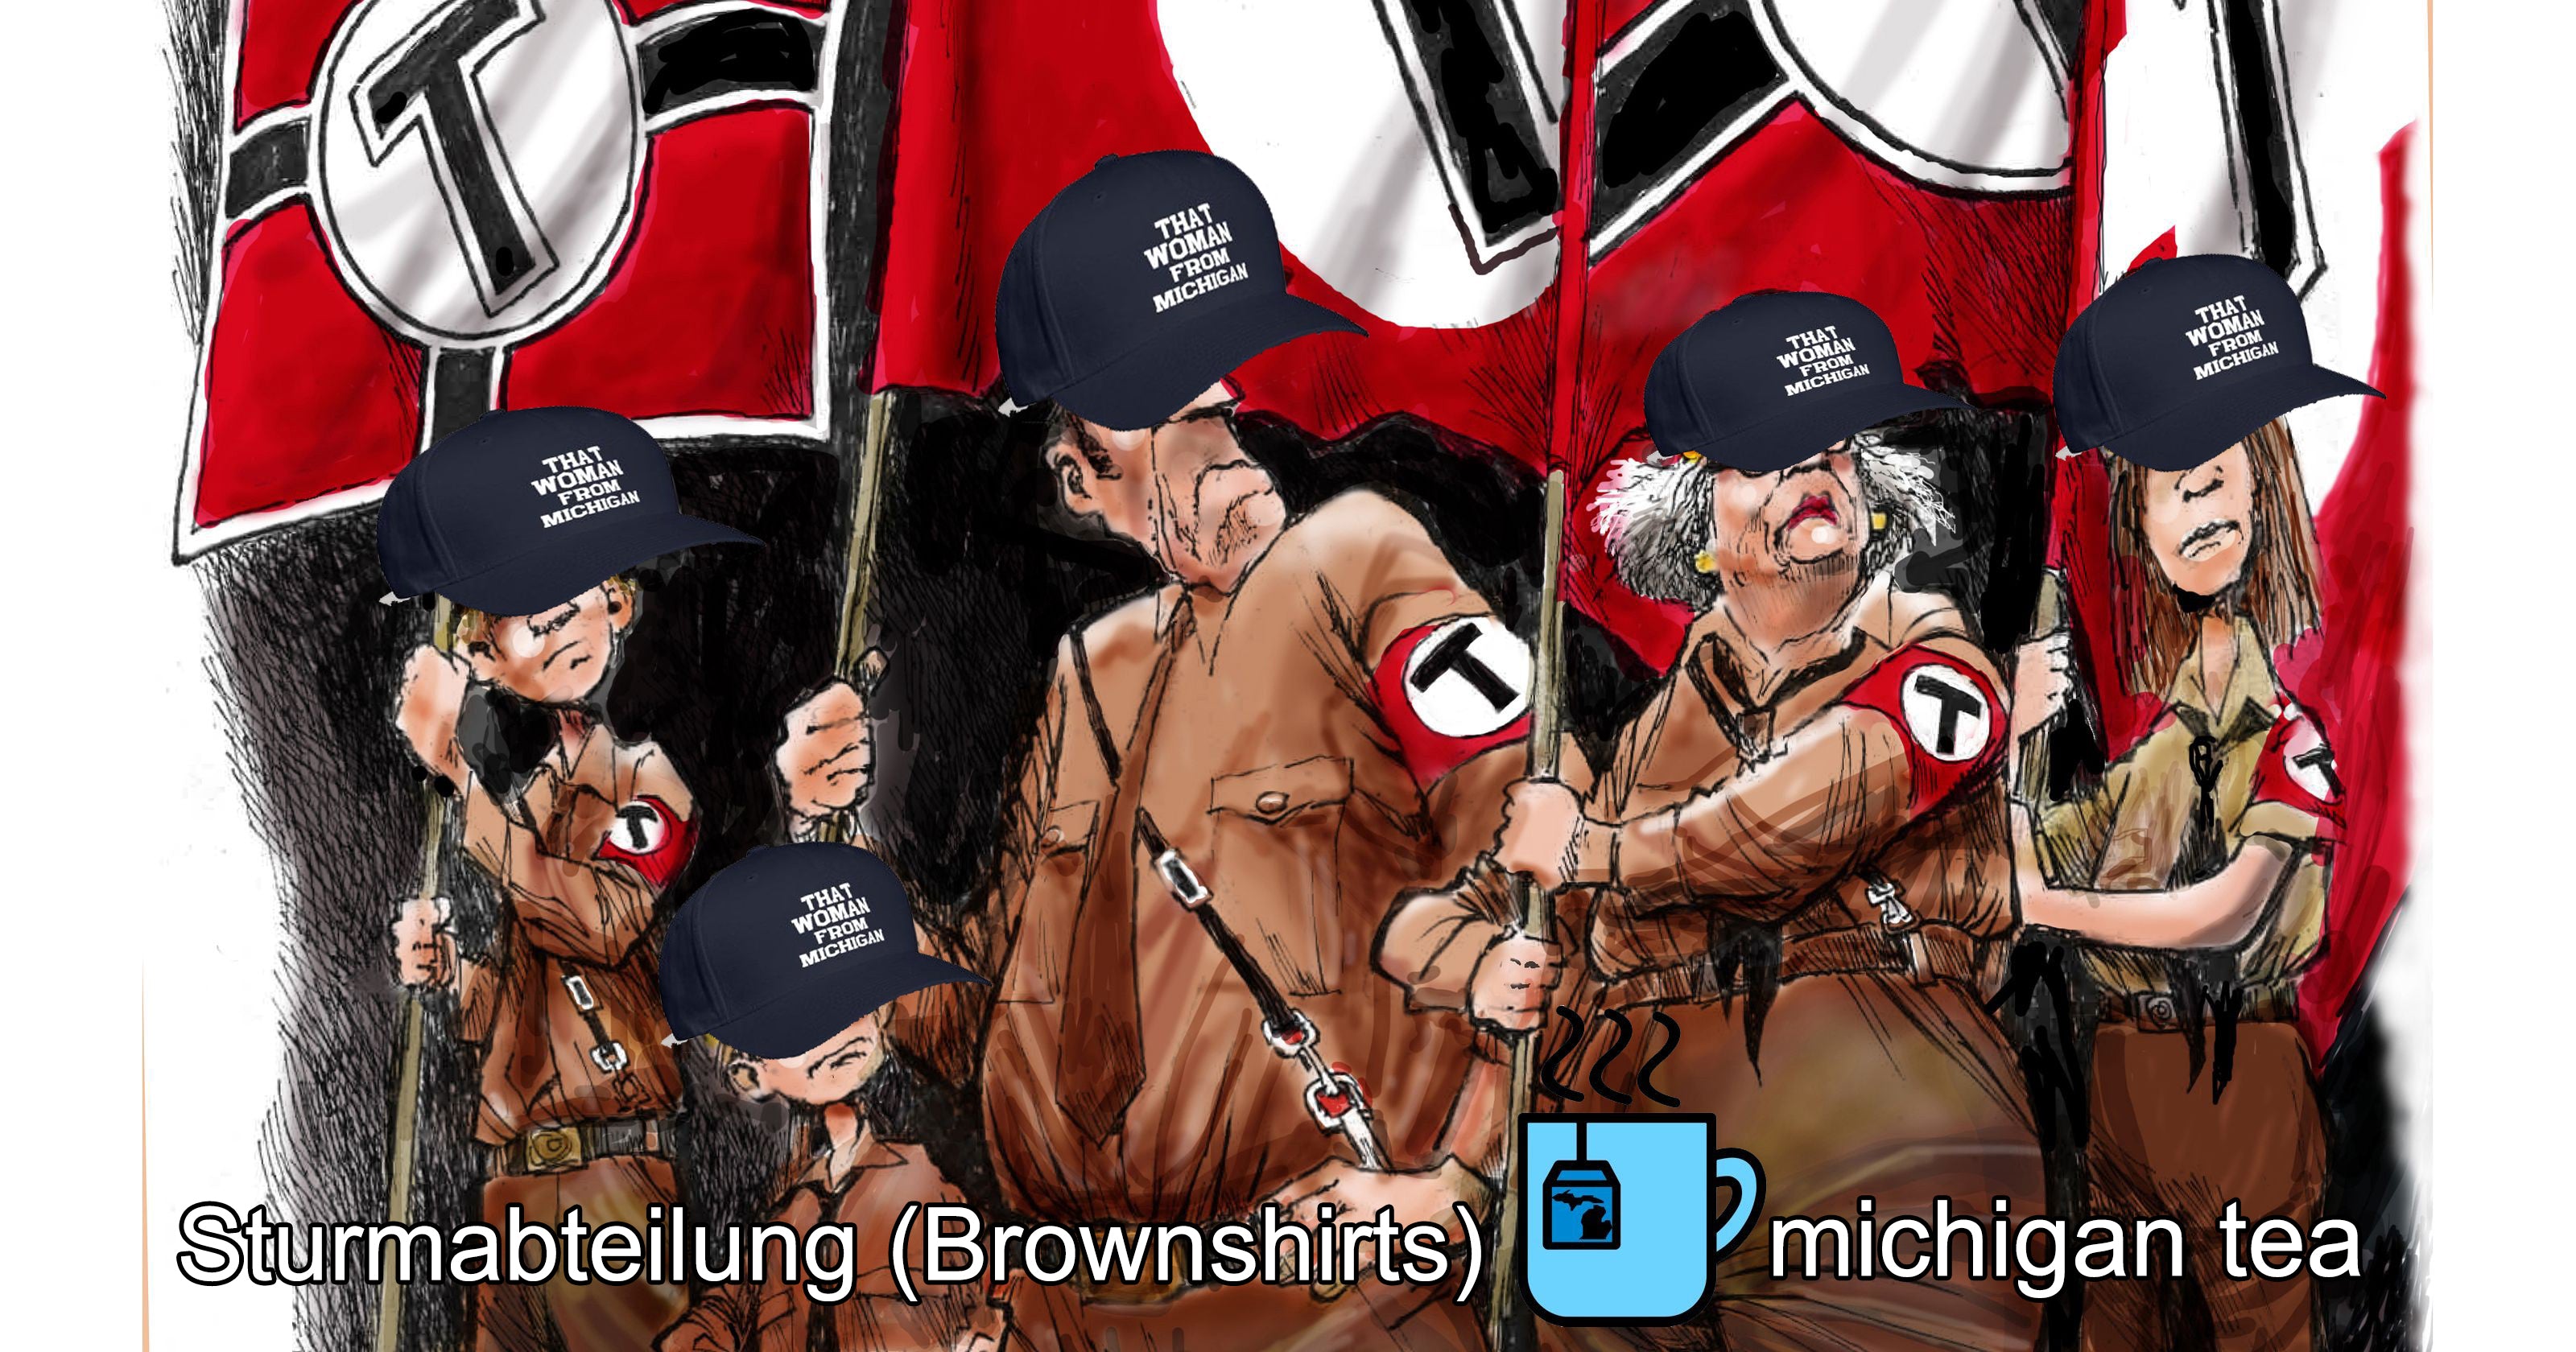 BEWARE! We Have Sturmabteilung (Brownshirts) Amongst Us! THEY ARE DOXING YOU!